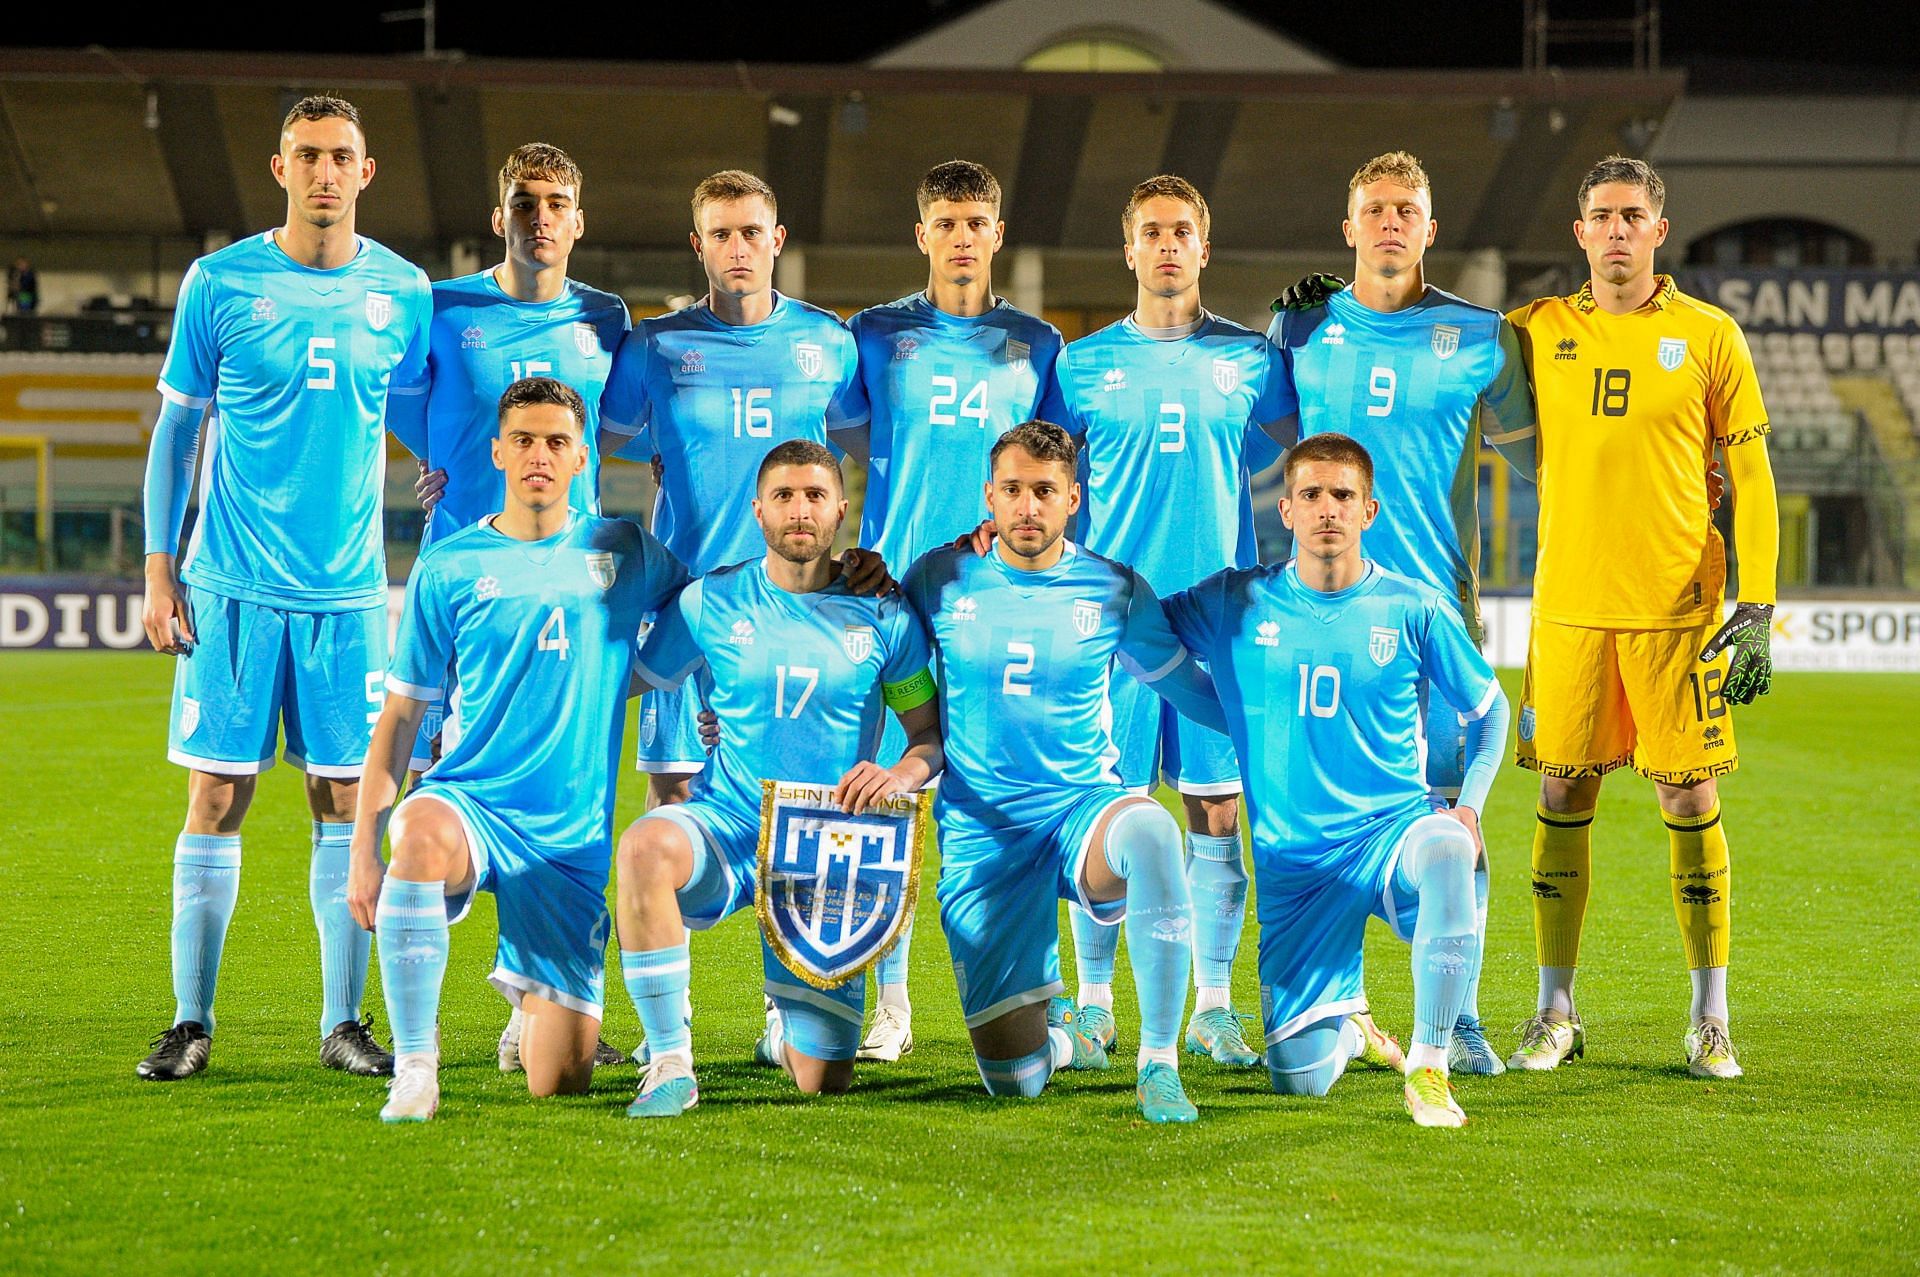 San Marino face St. Kitts in a friendly on Sunday 